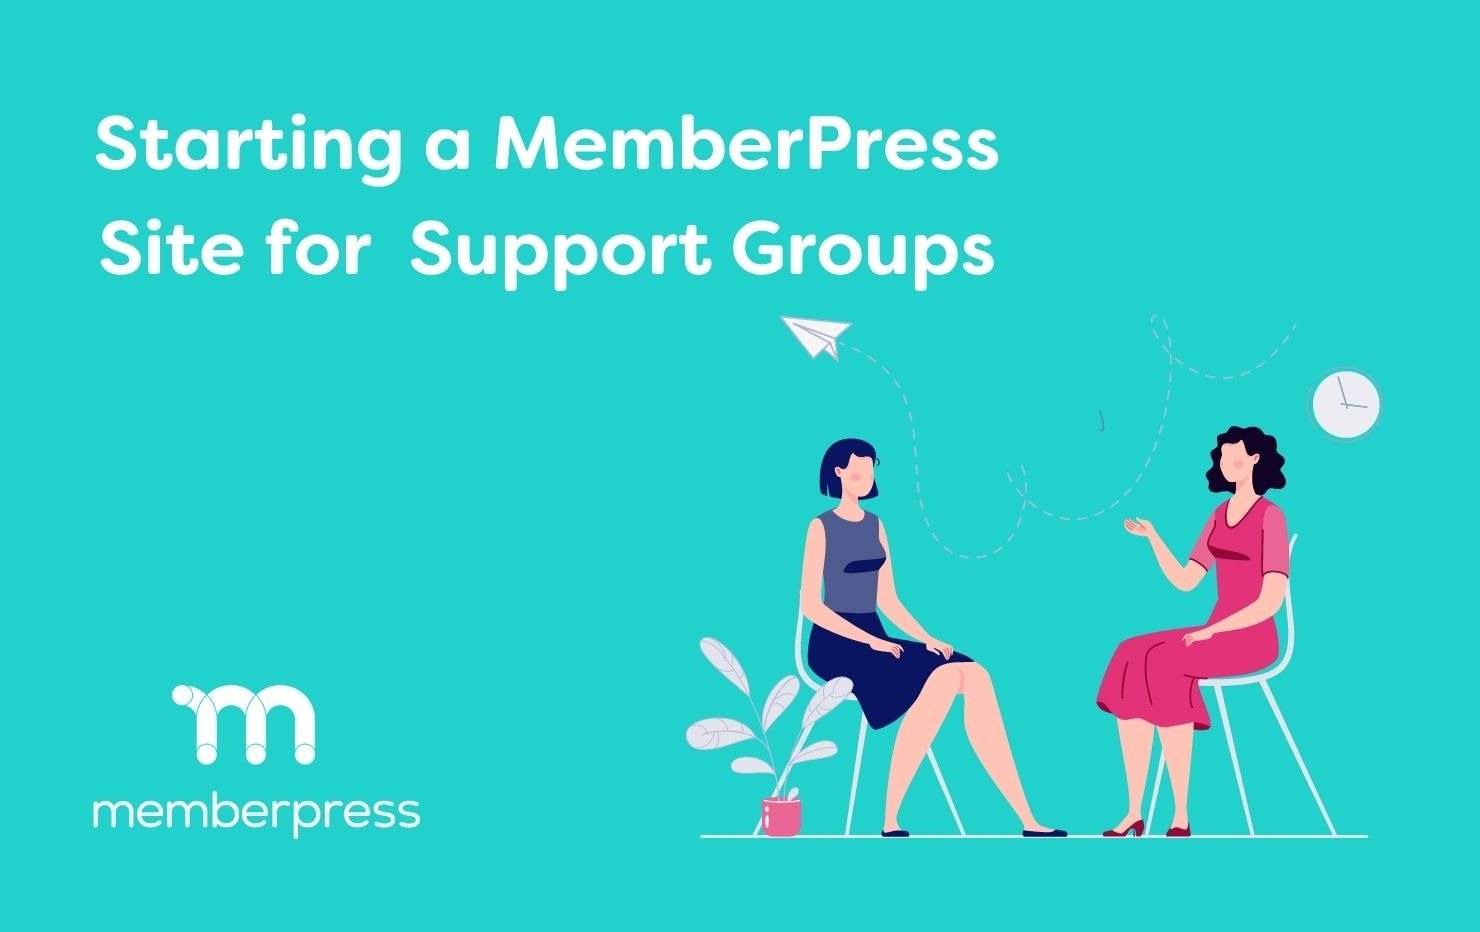 Two people sit and talk. Text beside reads "Starting a MemberPress site for Support Groups".